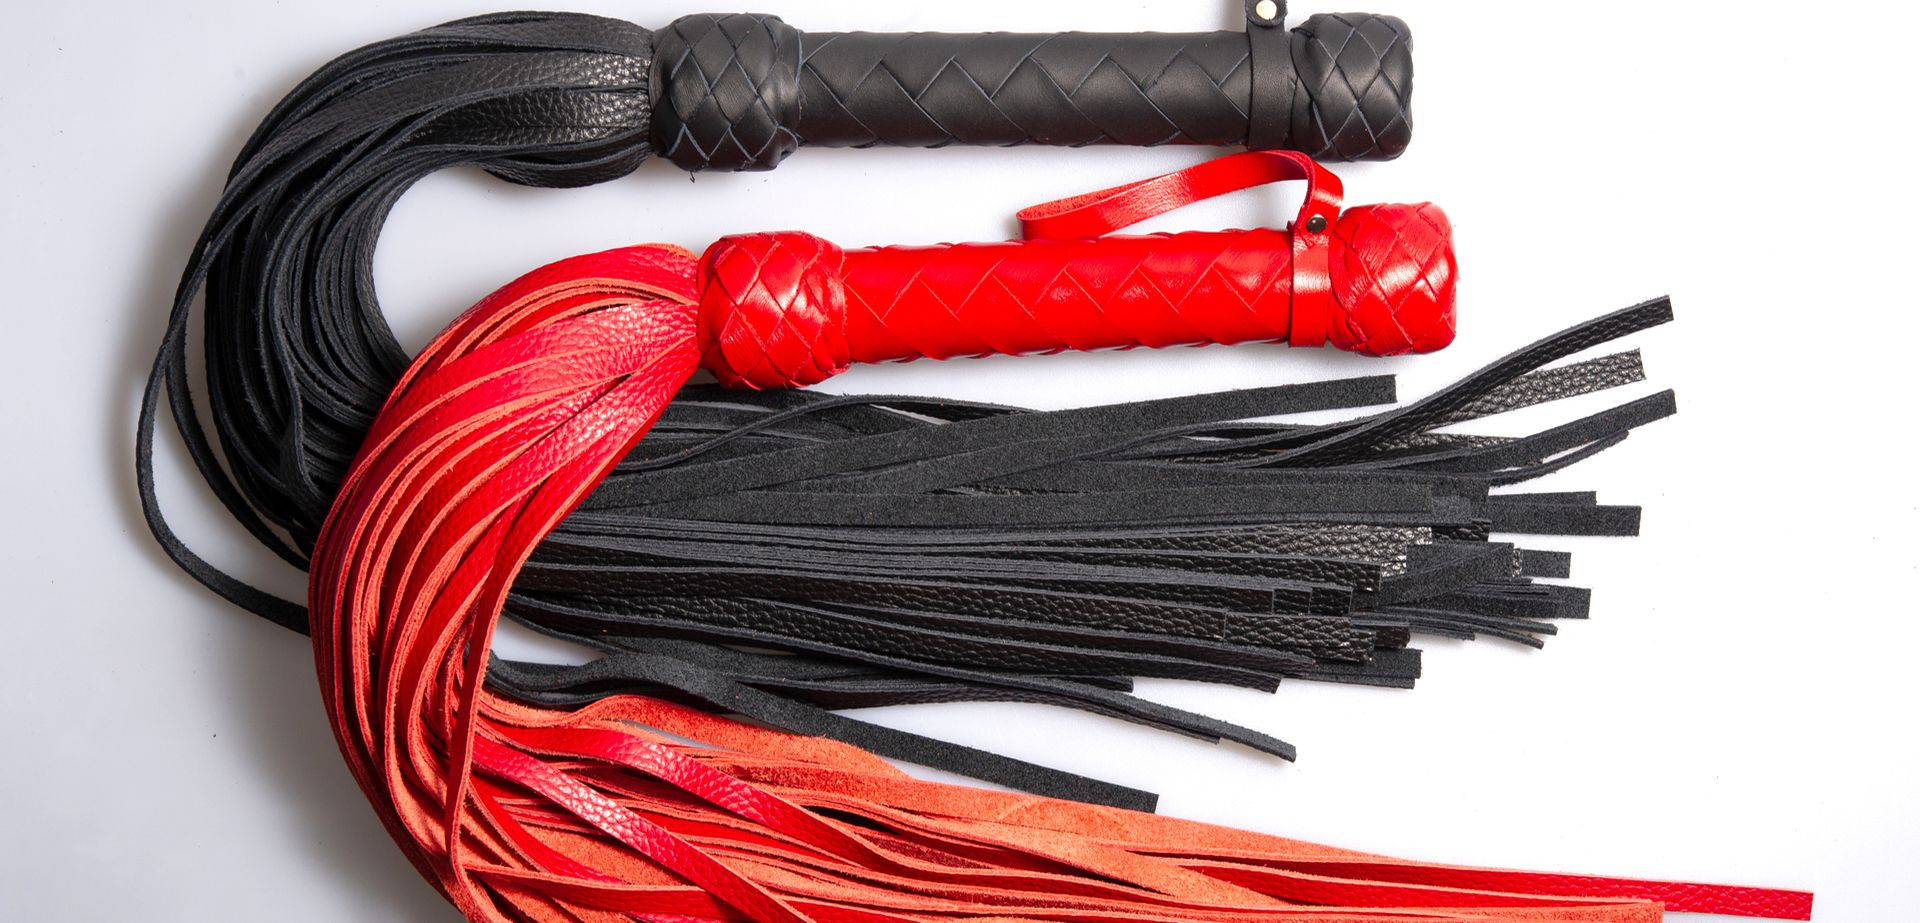 Black and red floggers.